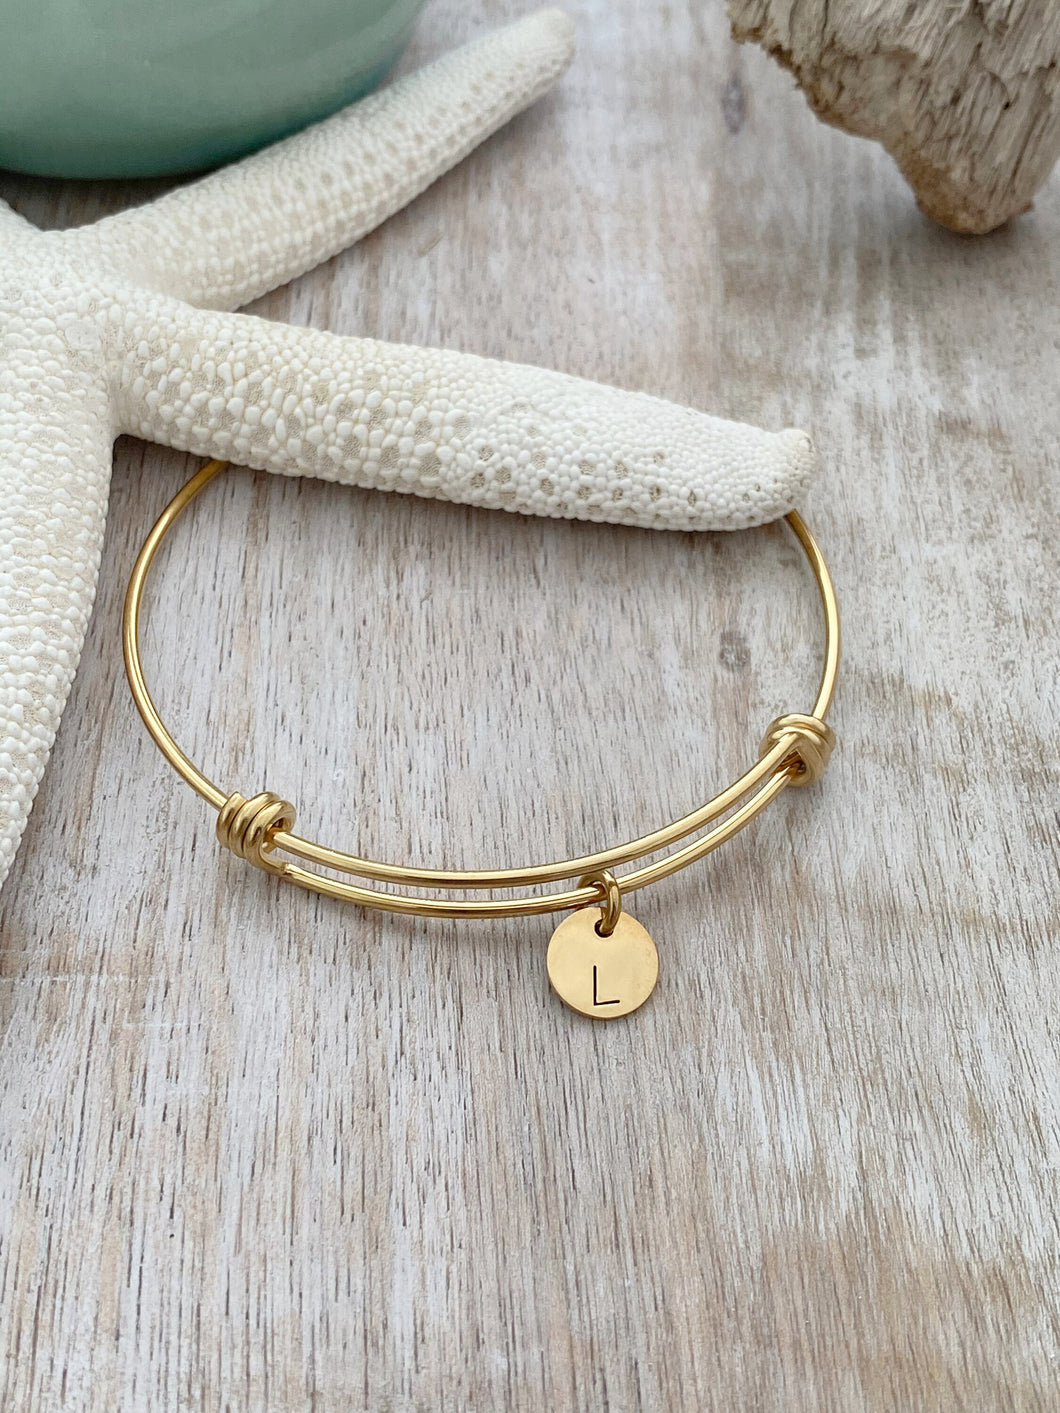 Personalized initial bracelet stainless steel - bangle bracelet - Multiple initials - gift for mom Christmas Gift - Kids monograms - simple